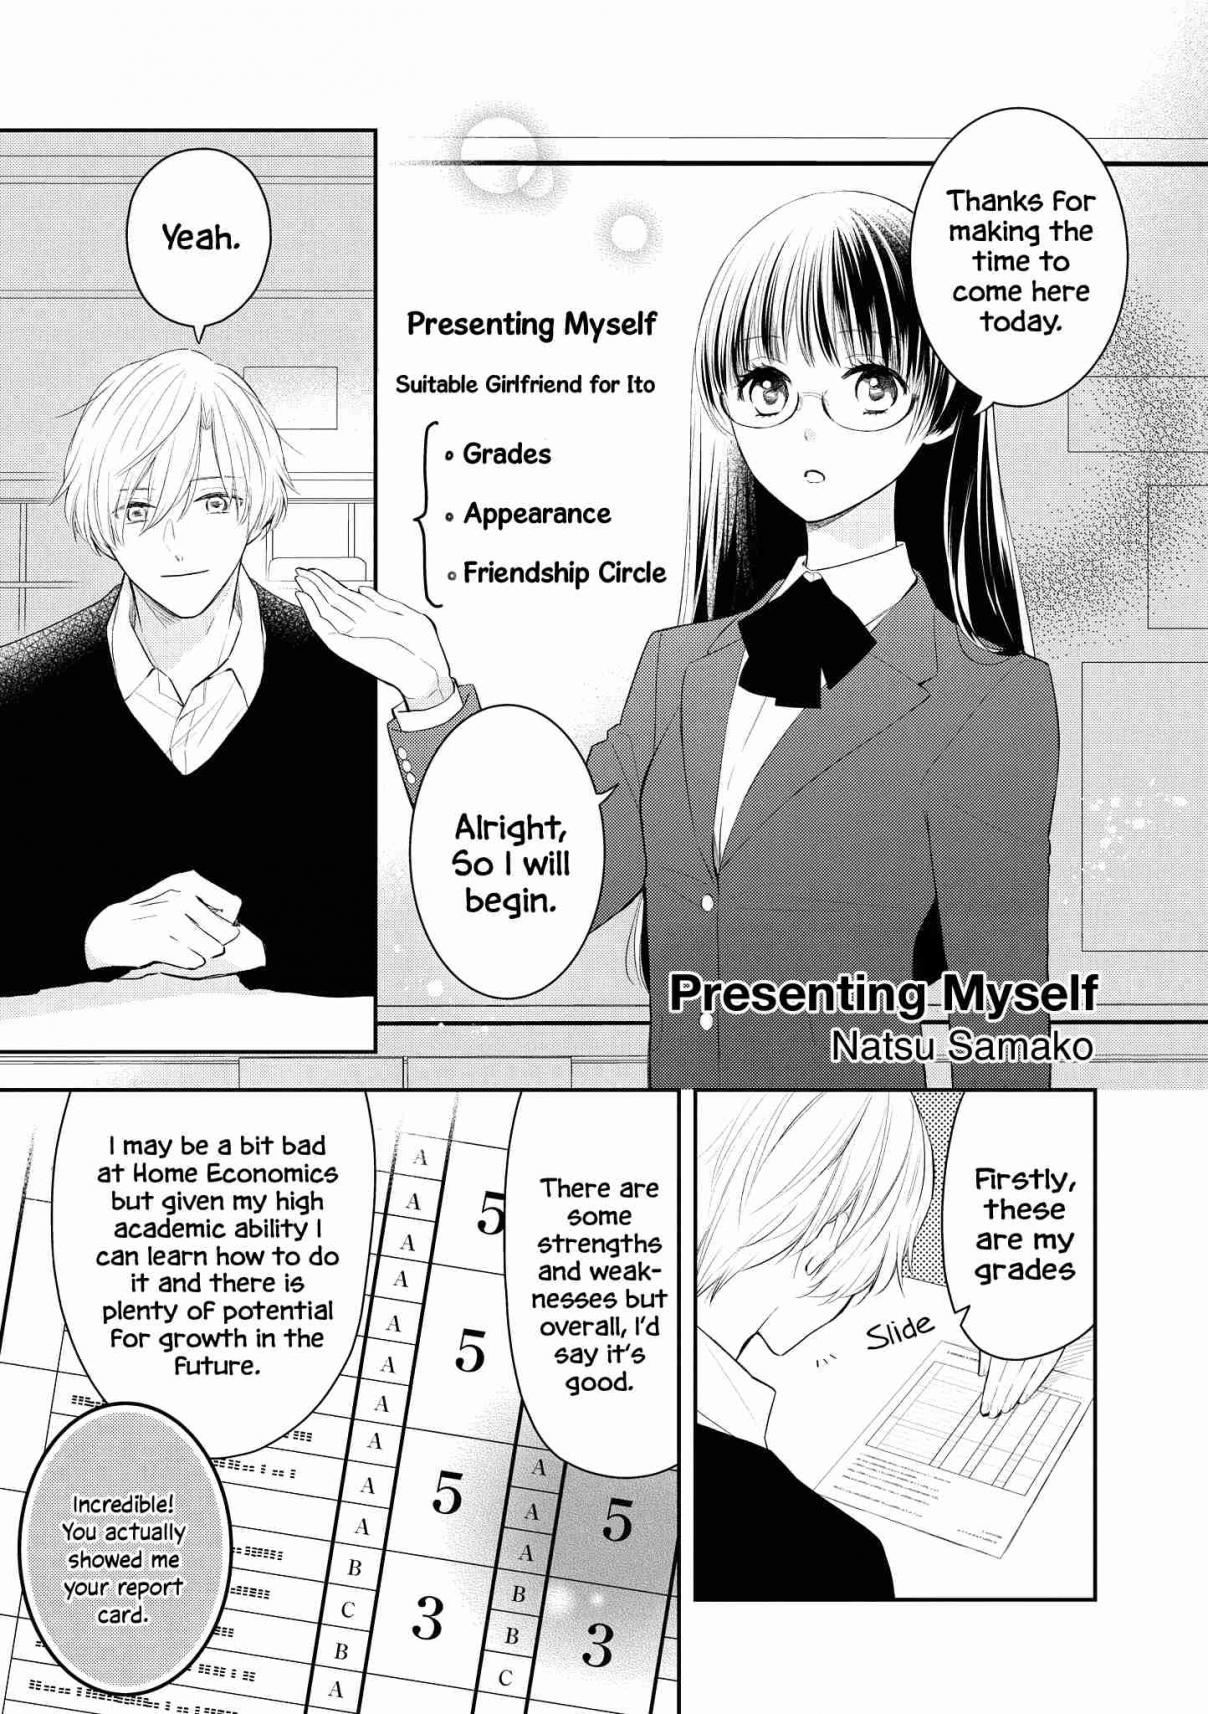 “It’s Too Precious and Hard to Read!!” 4P Short Stories Vol. 2 Ch. 35 Presenting Myself [by Natsu Samako]